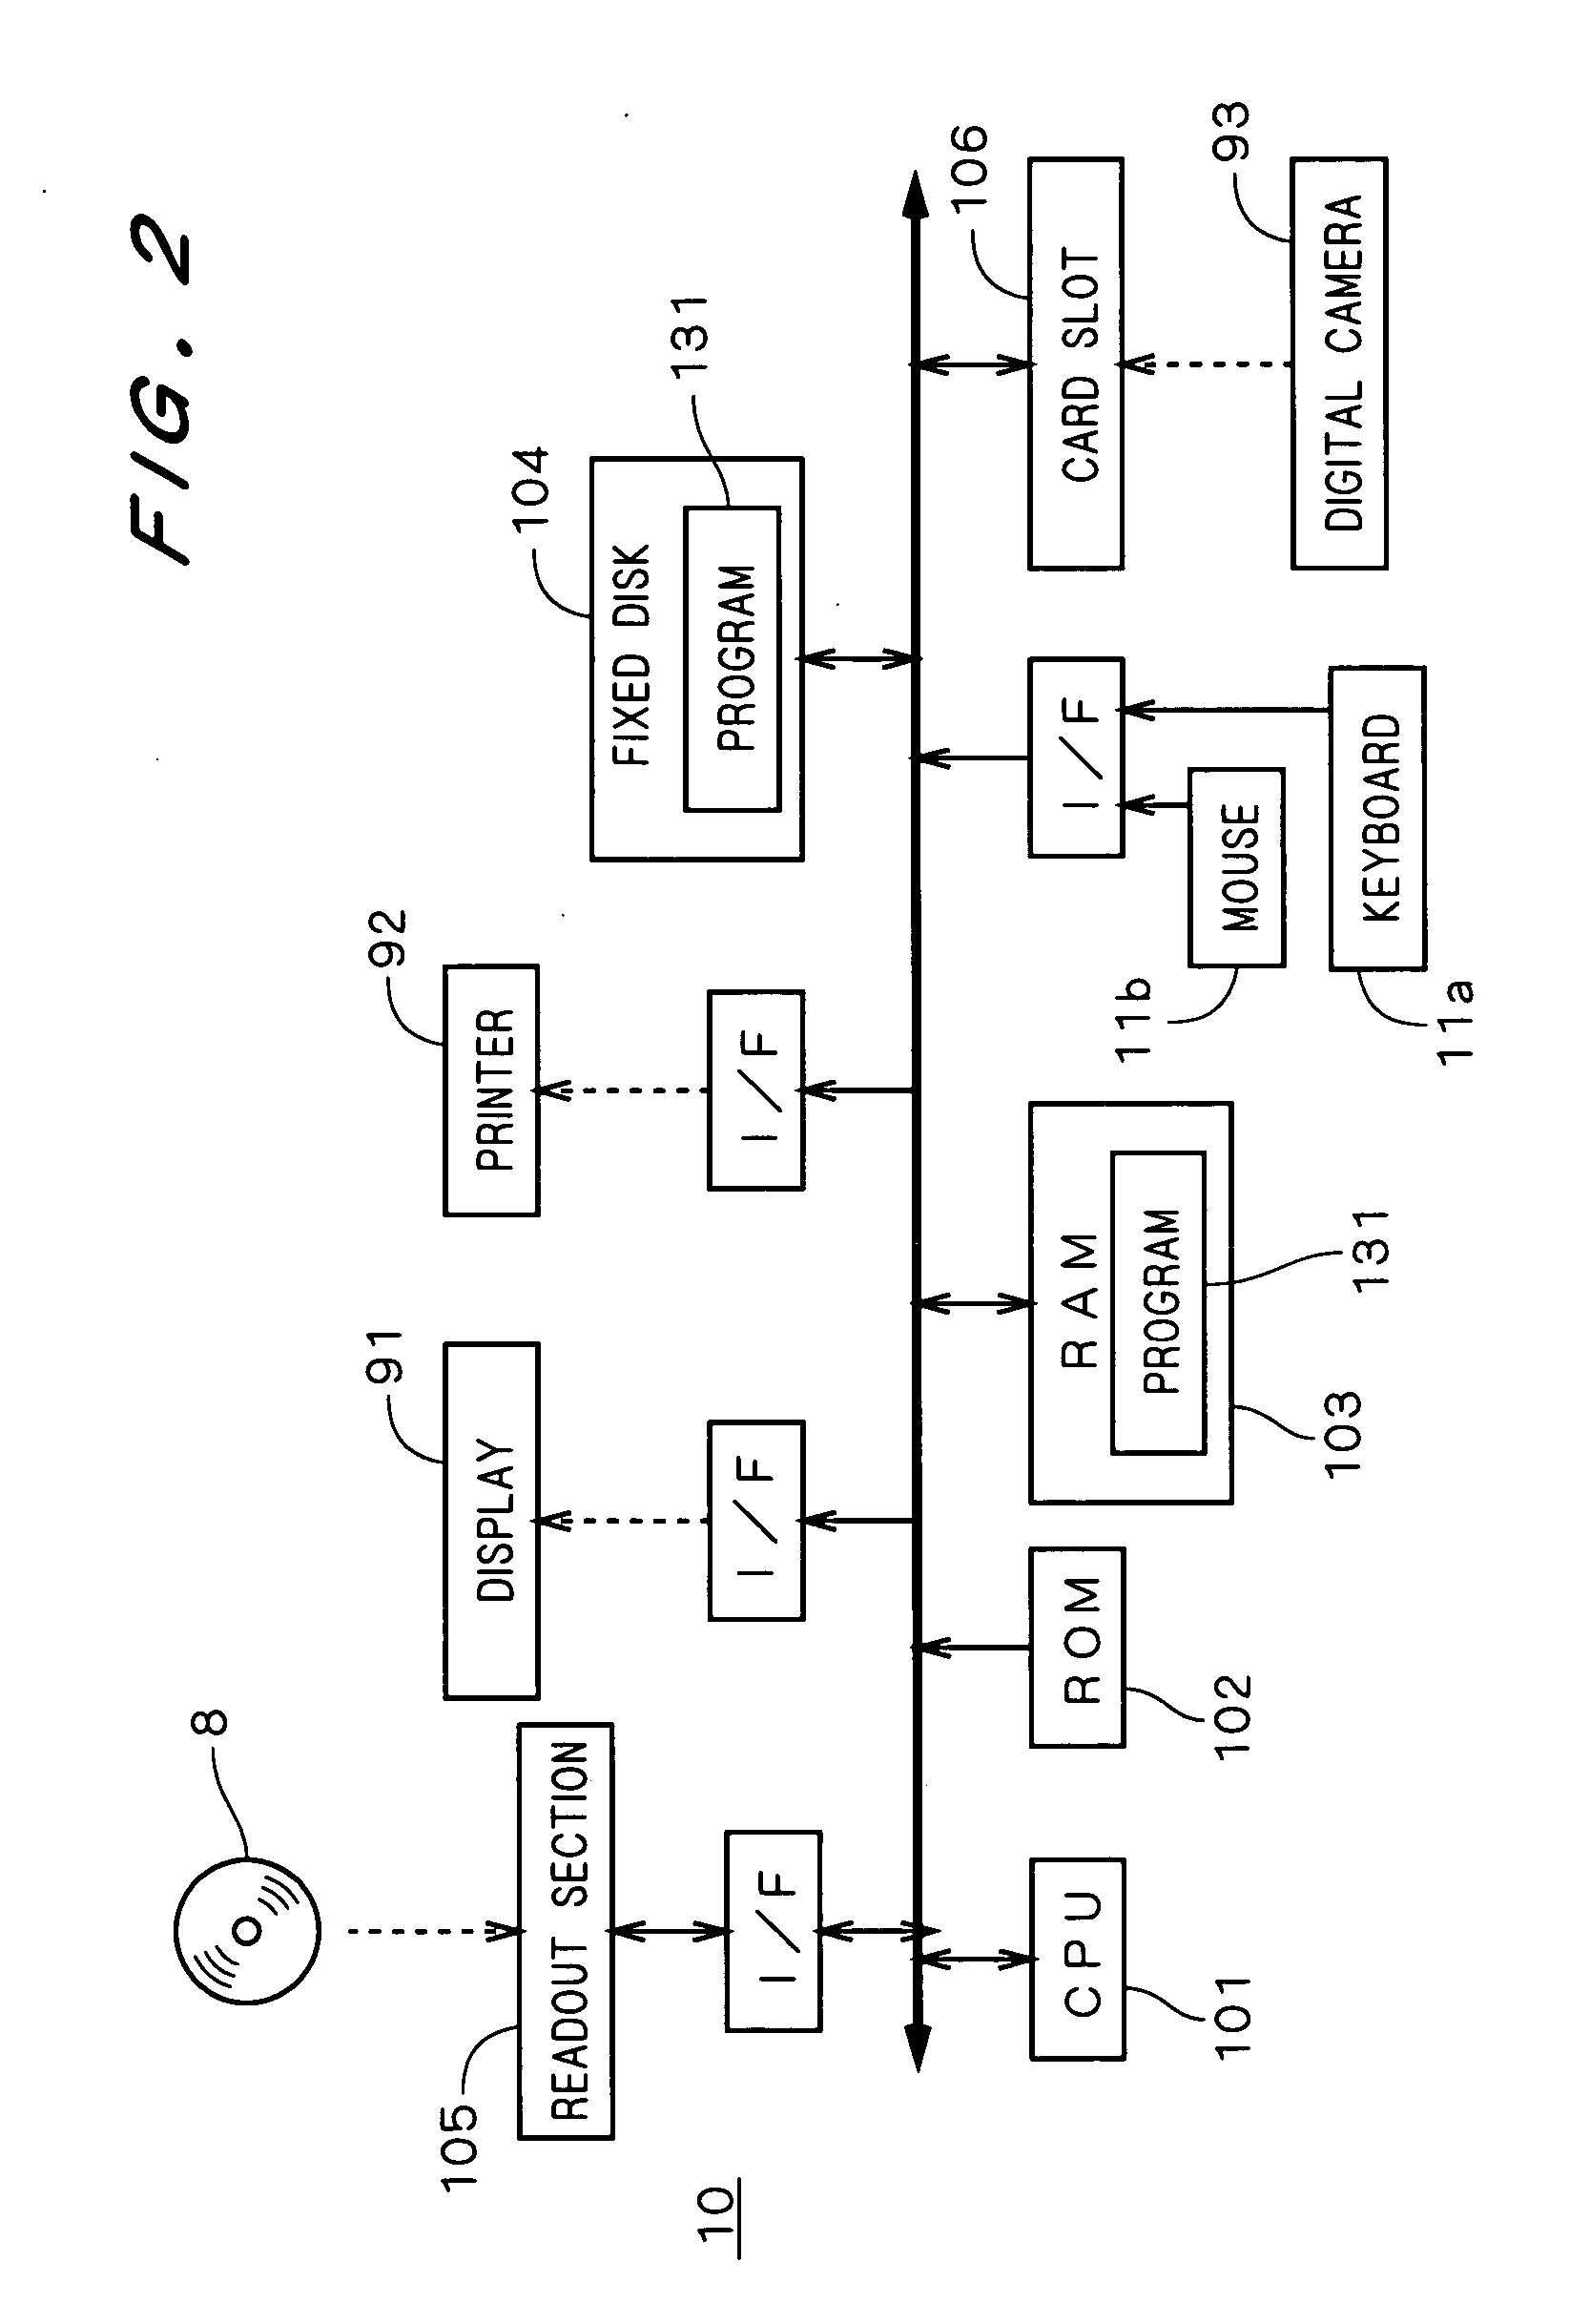 Image processing apparatus for correcting contrast of image